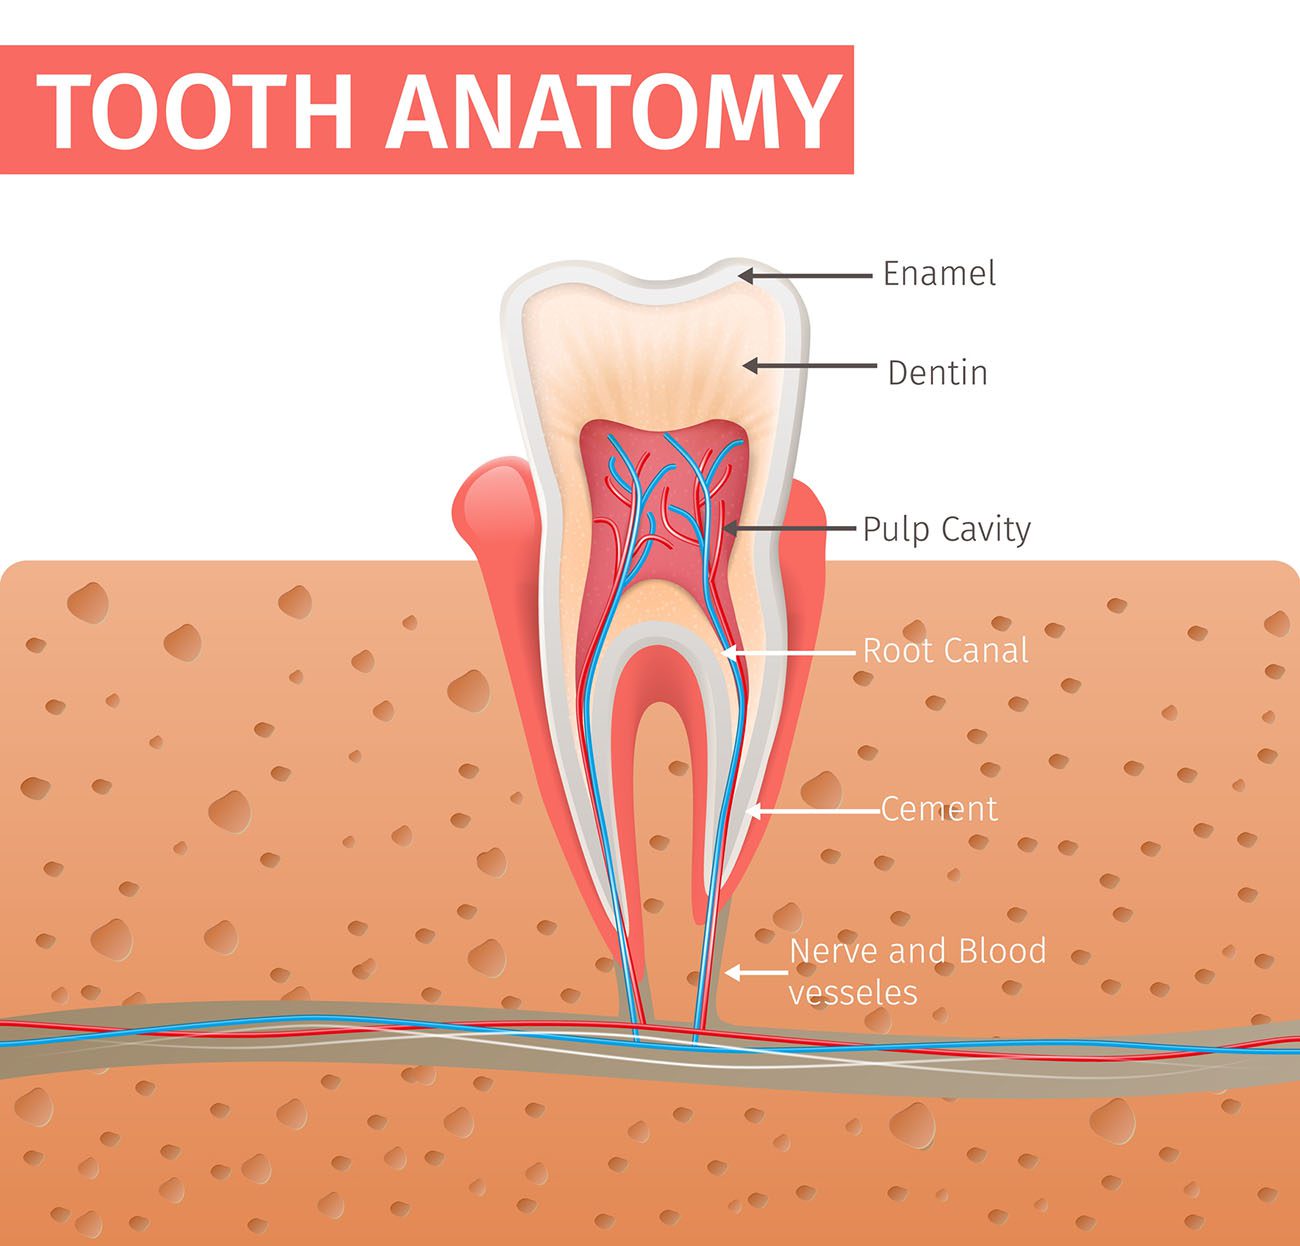 Do You Really Need a Root Canal? | Arlington Heights, IL, Dentist